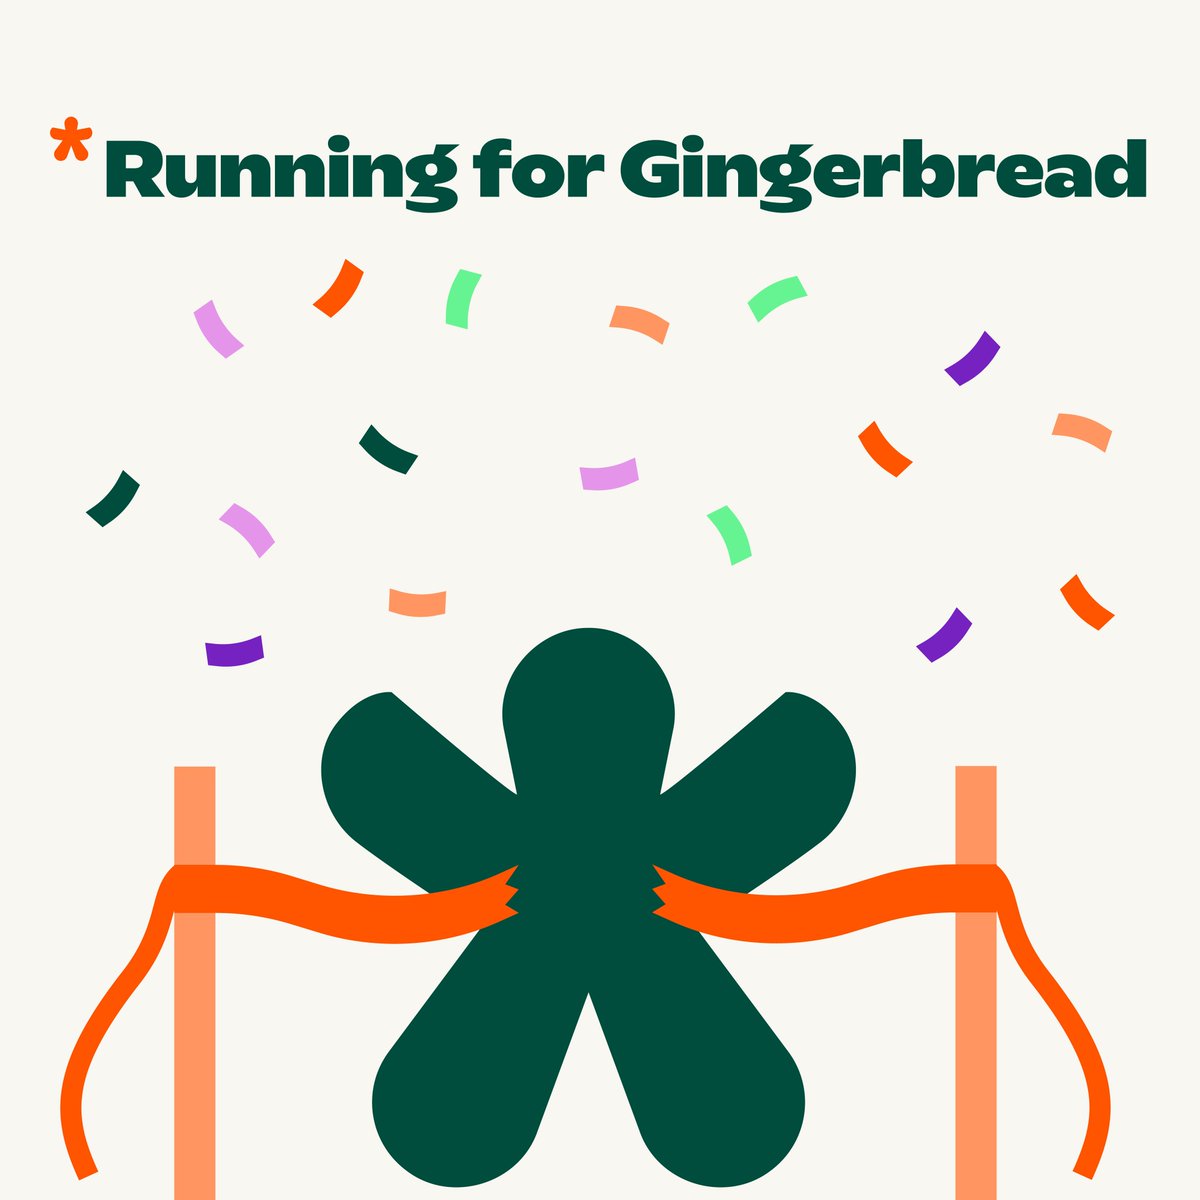 Have you always wanted to run the #LondonMarathon? Why not apply for the ballot and run for #TeamGingerbread! You can find out all the information here: orlo.uk/TIa4z be quick though, entries close today!